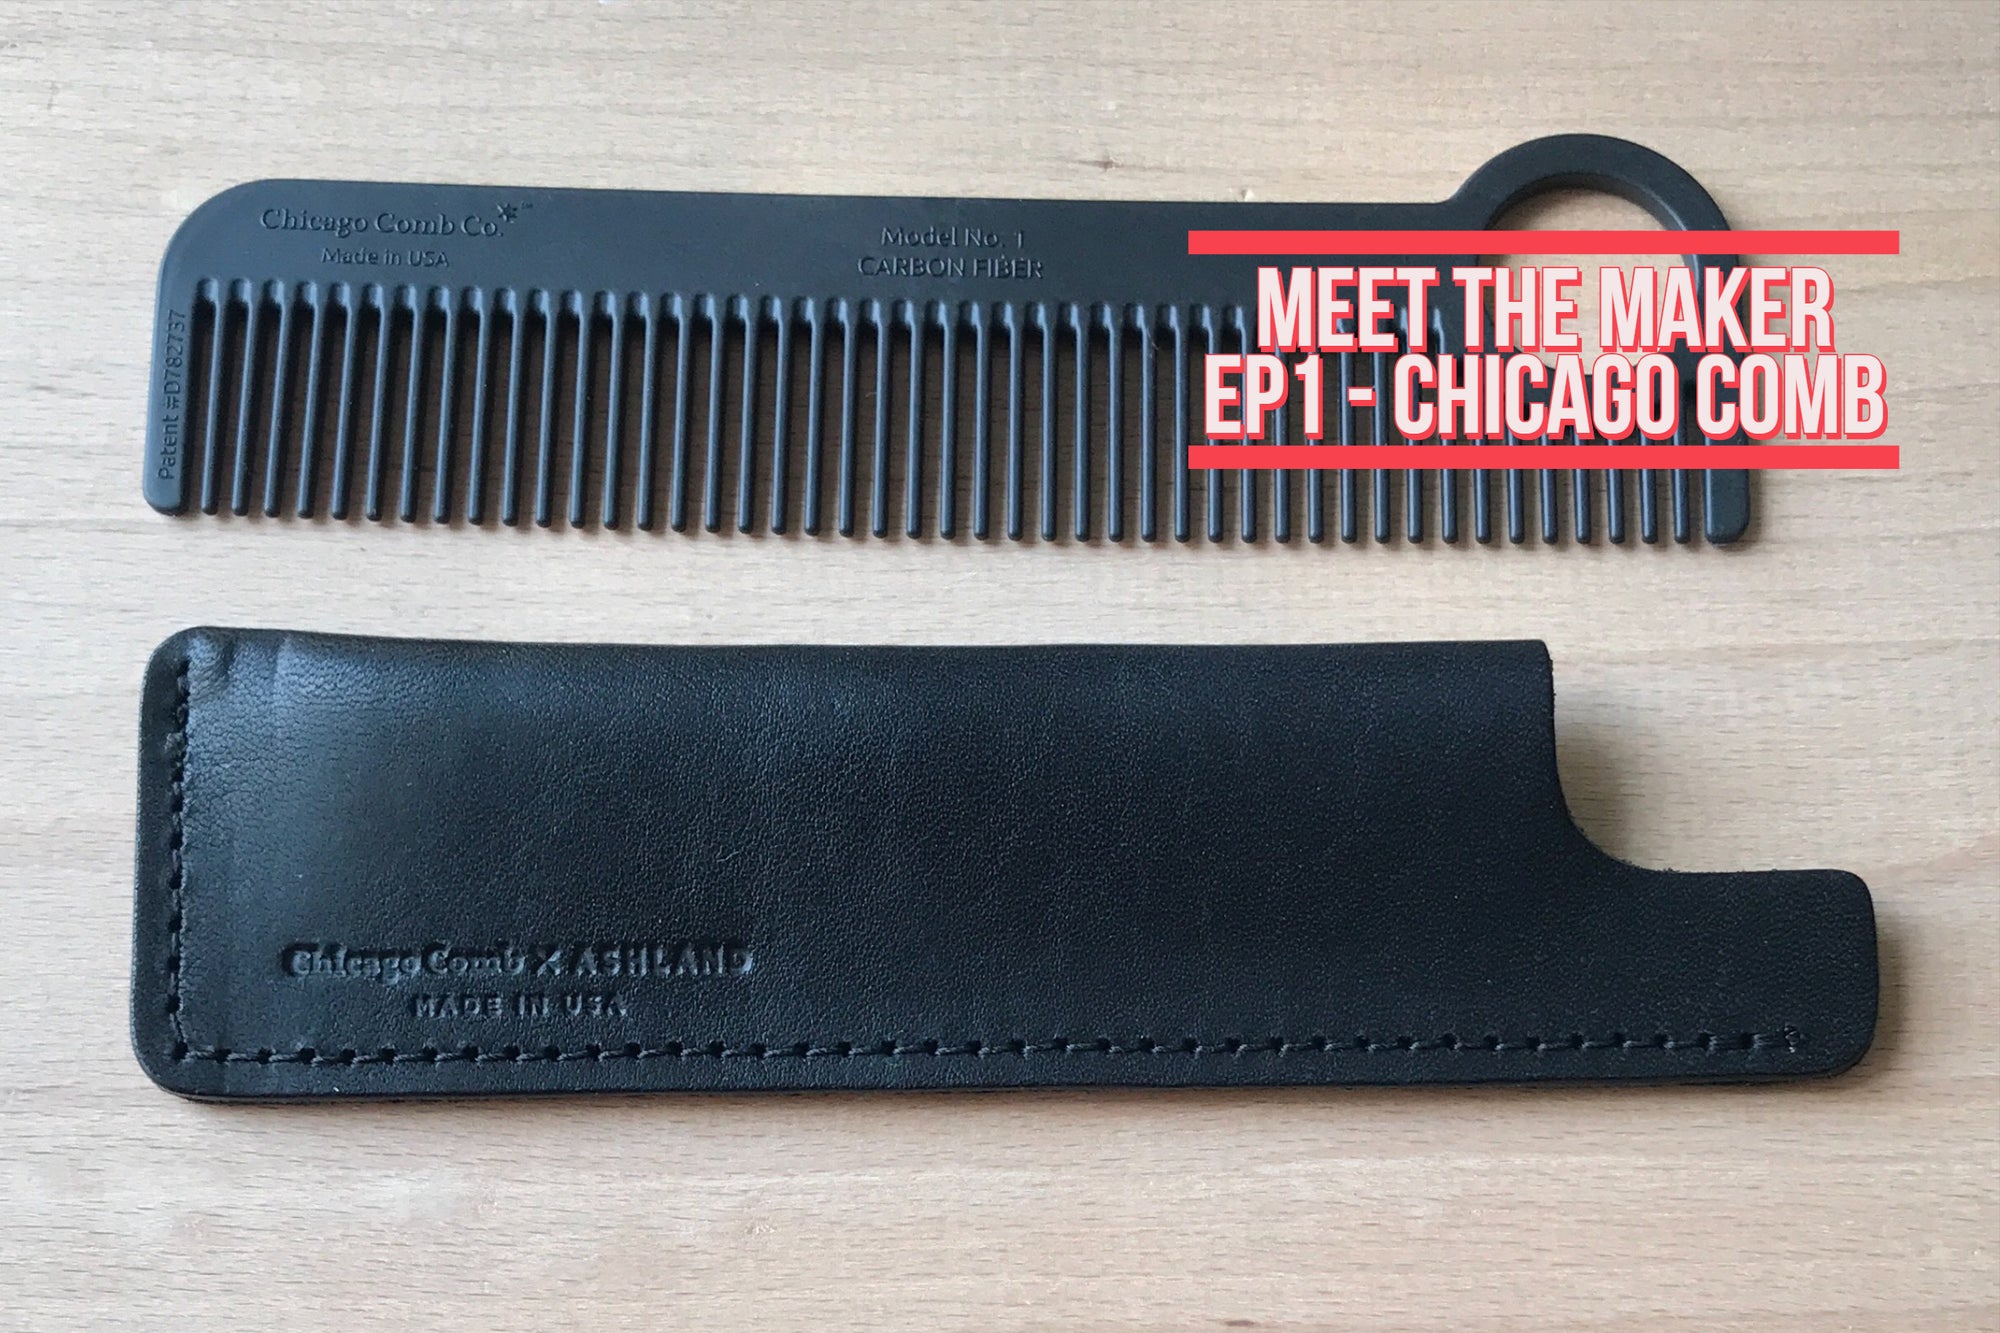 Meet the Maker: EP1 Chicago Comb